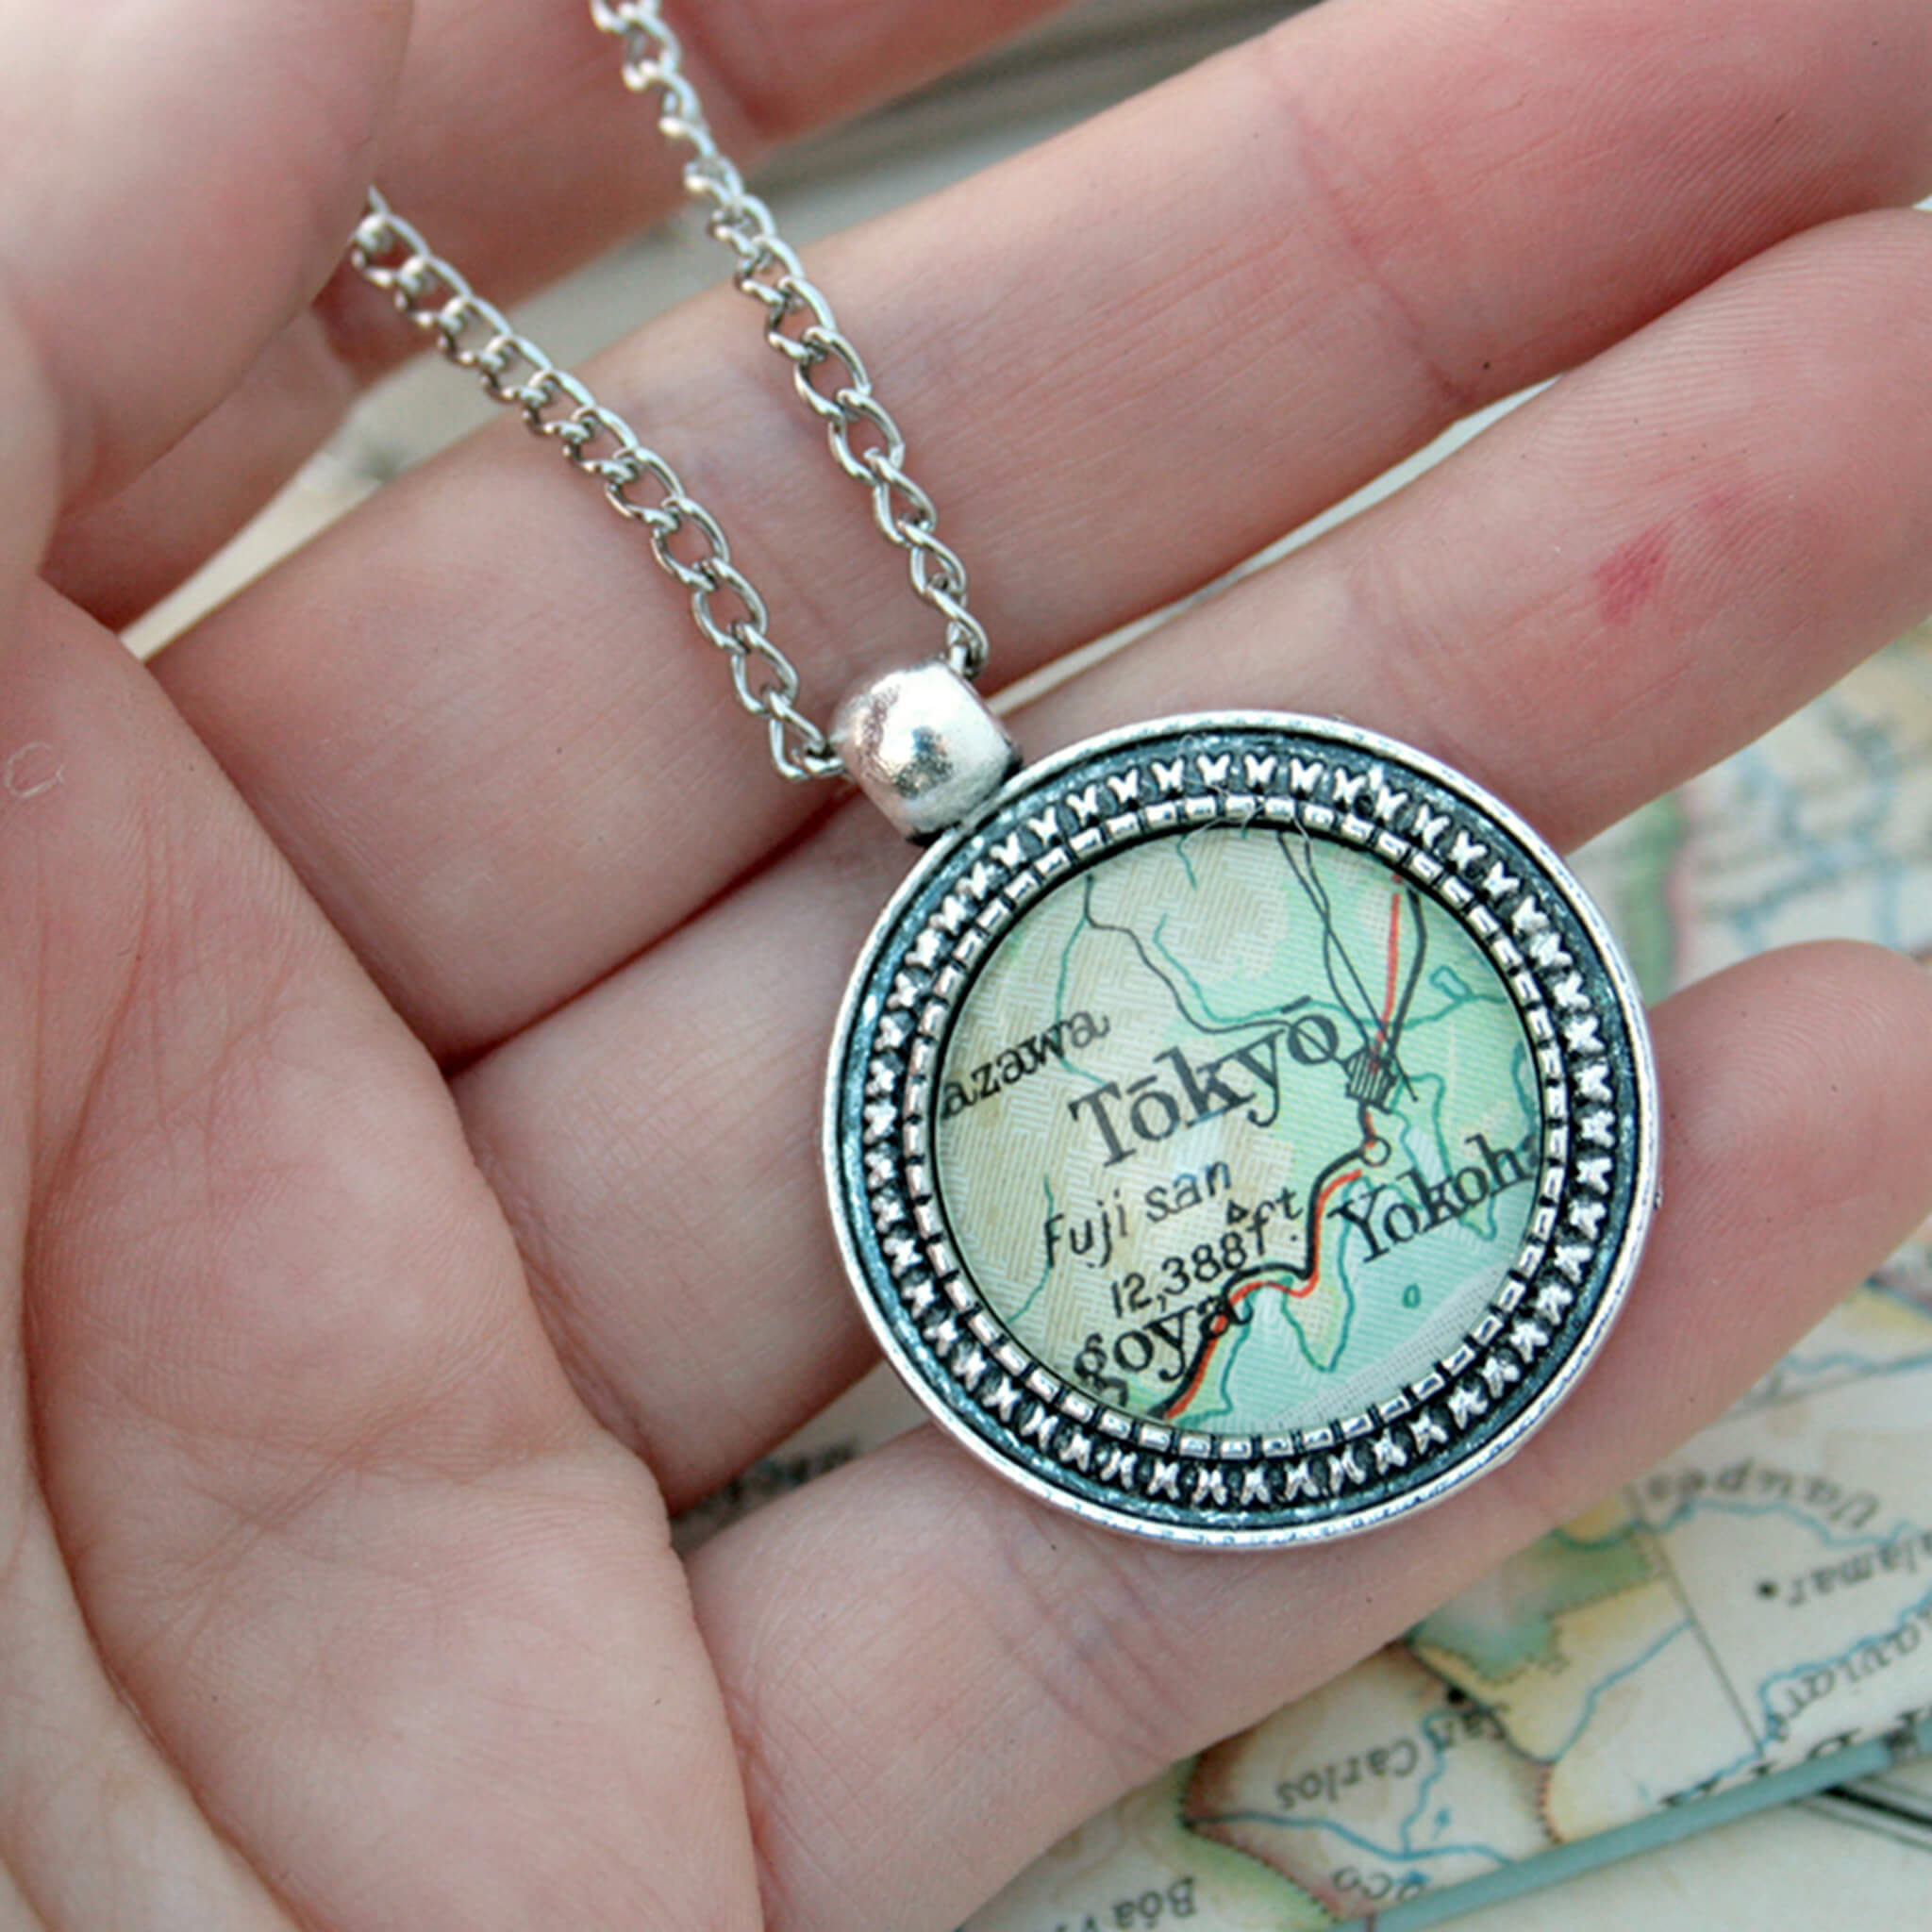 Hand holding Silver coloured pendant necklace with map of Tokyo